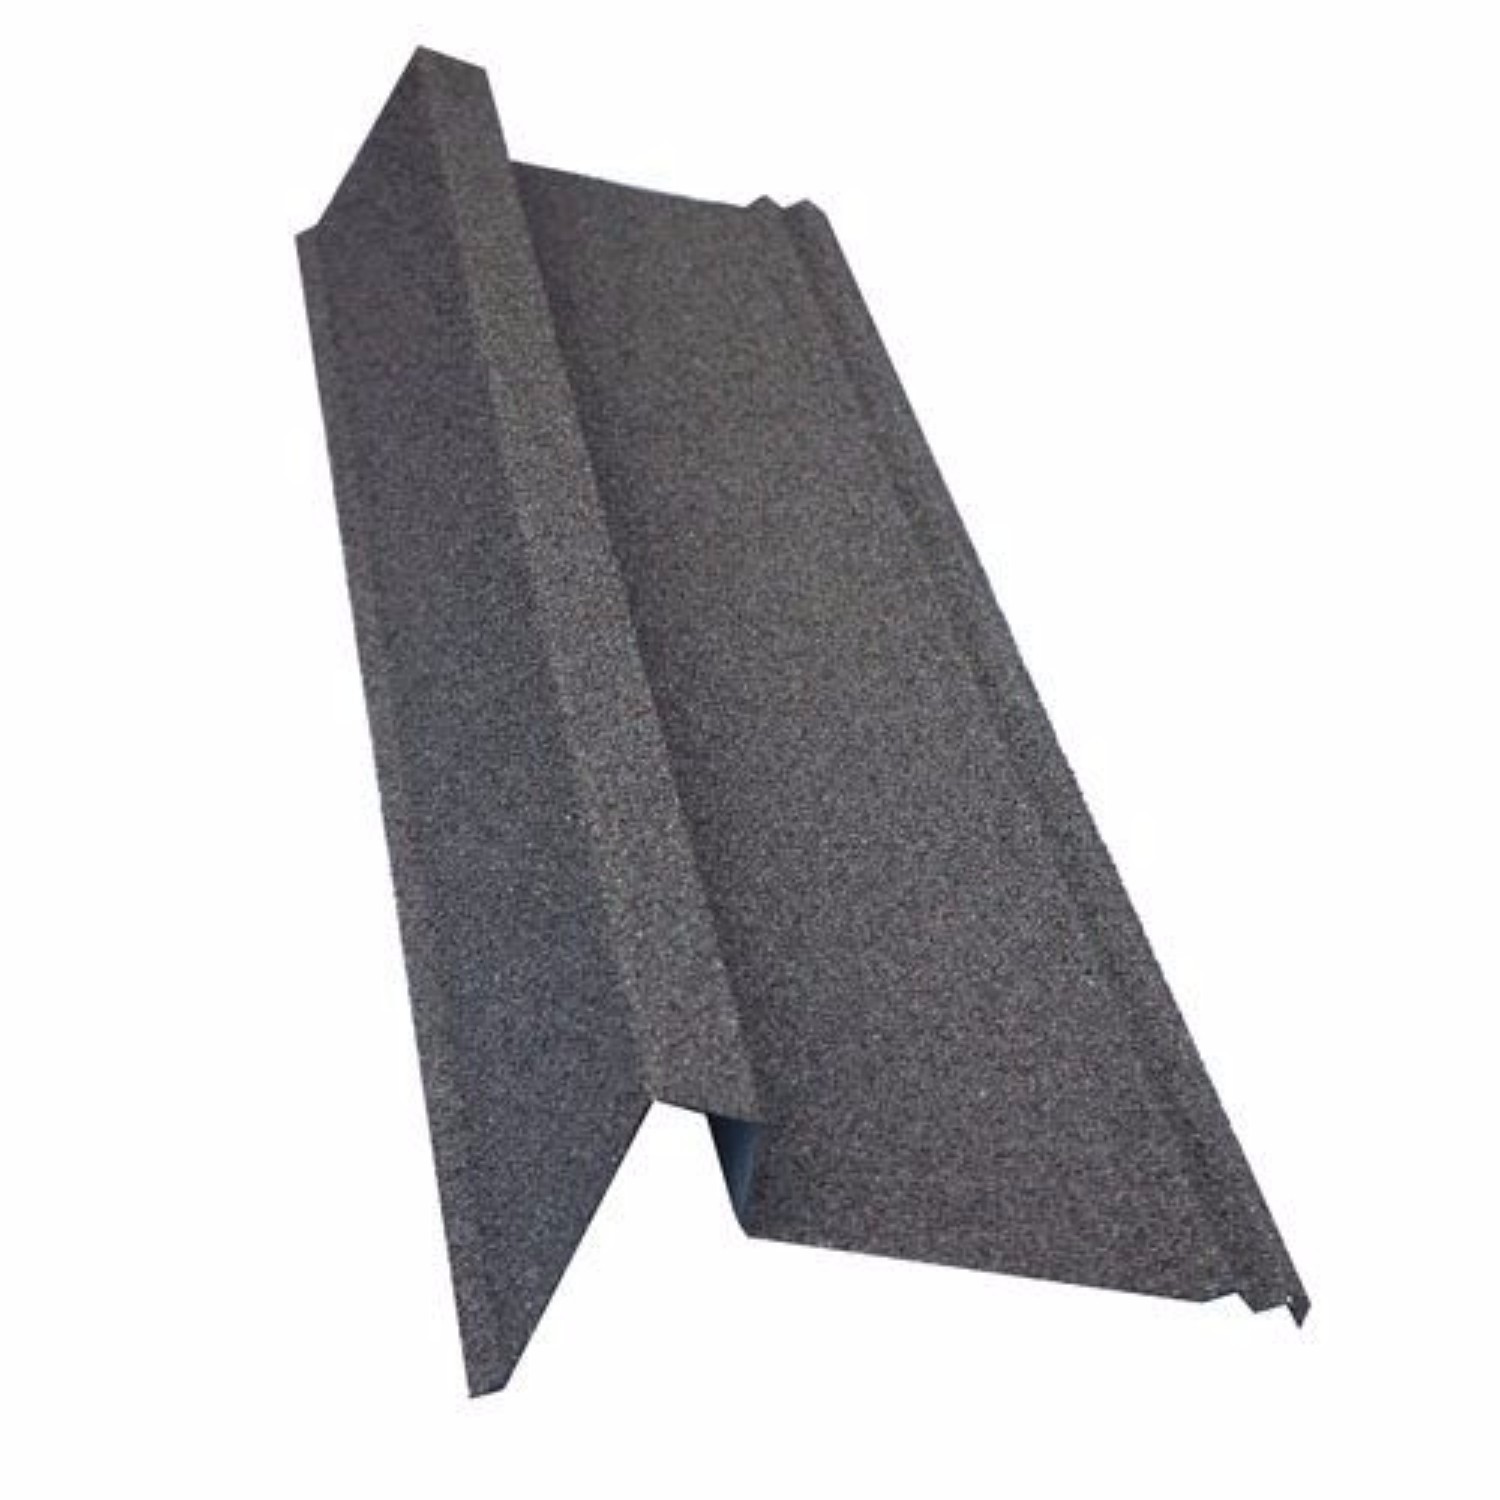 Corotile Lightweight Metal Roofing Sheet - Barge Cover - Charcoal (910mm)